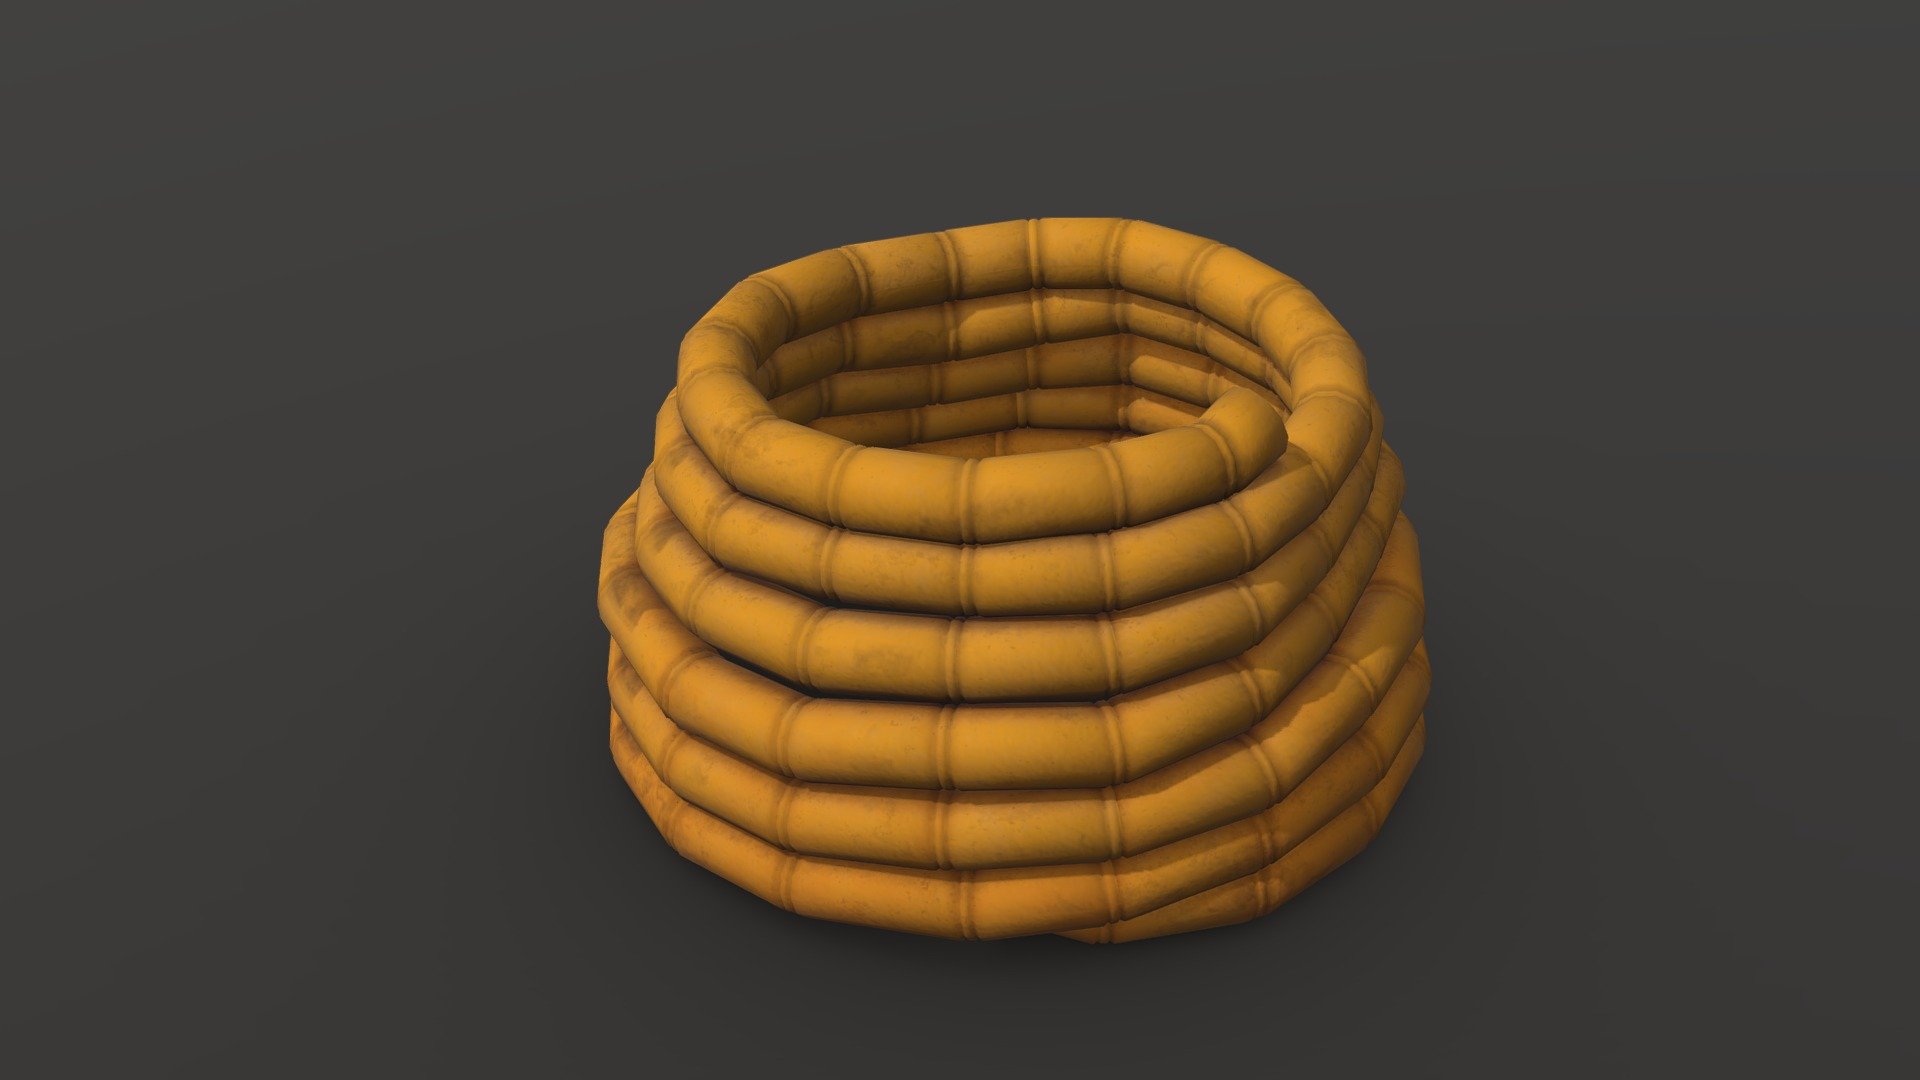 Low Poly Stylized Hose for your renders and games

Textures:

Diffuse color, Roughness, Normal

All textures are 4K

Files Formats:

Blend

Fbx

Obj - Hose - Buy Royalty Free 3D model by Vanessa Araújo (@vanessa3d) 3d model